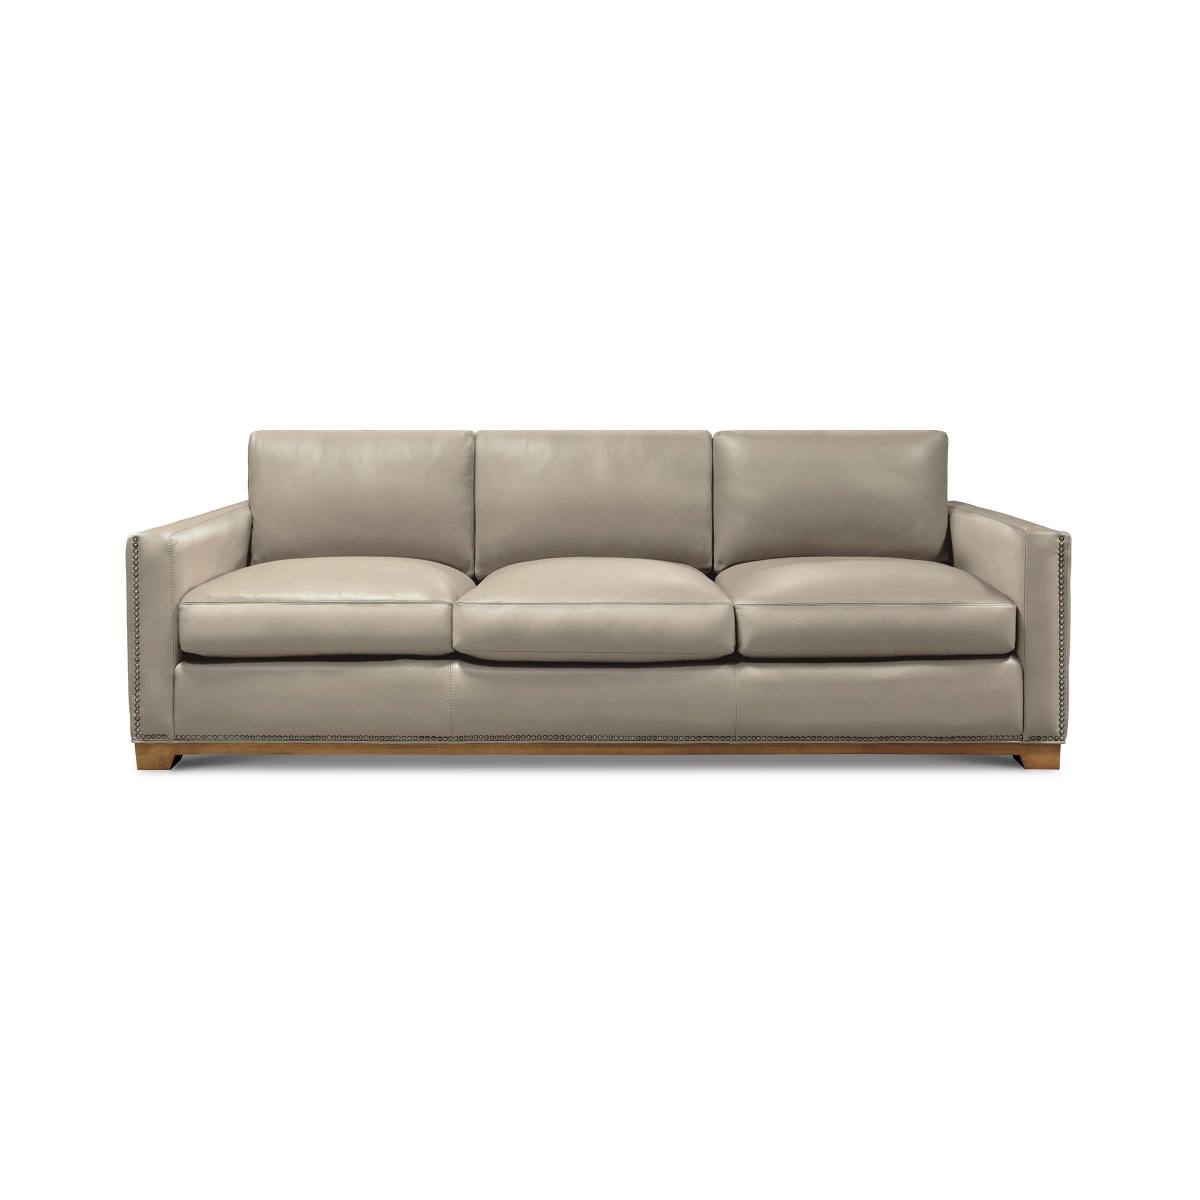 Sofas - Eleanor Rigby Home Luxury Upholstered Sofas